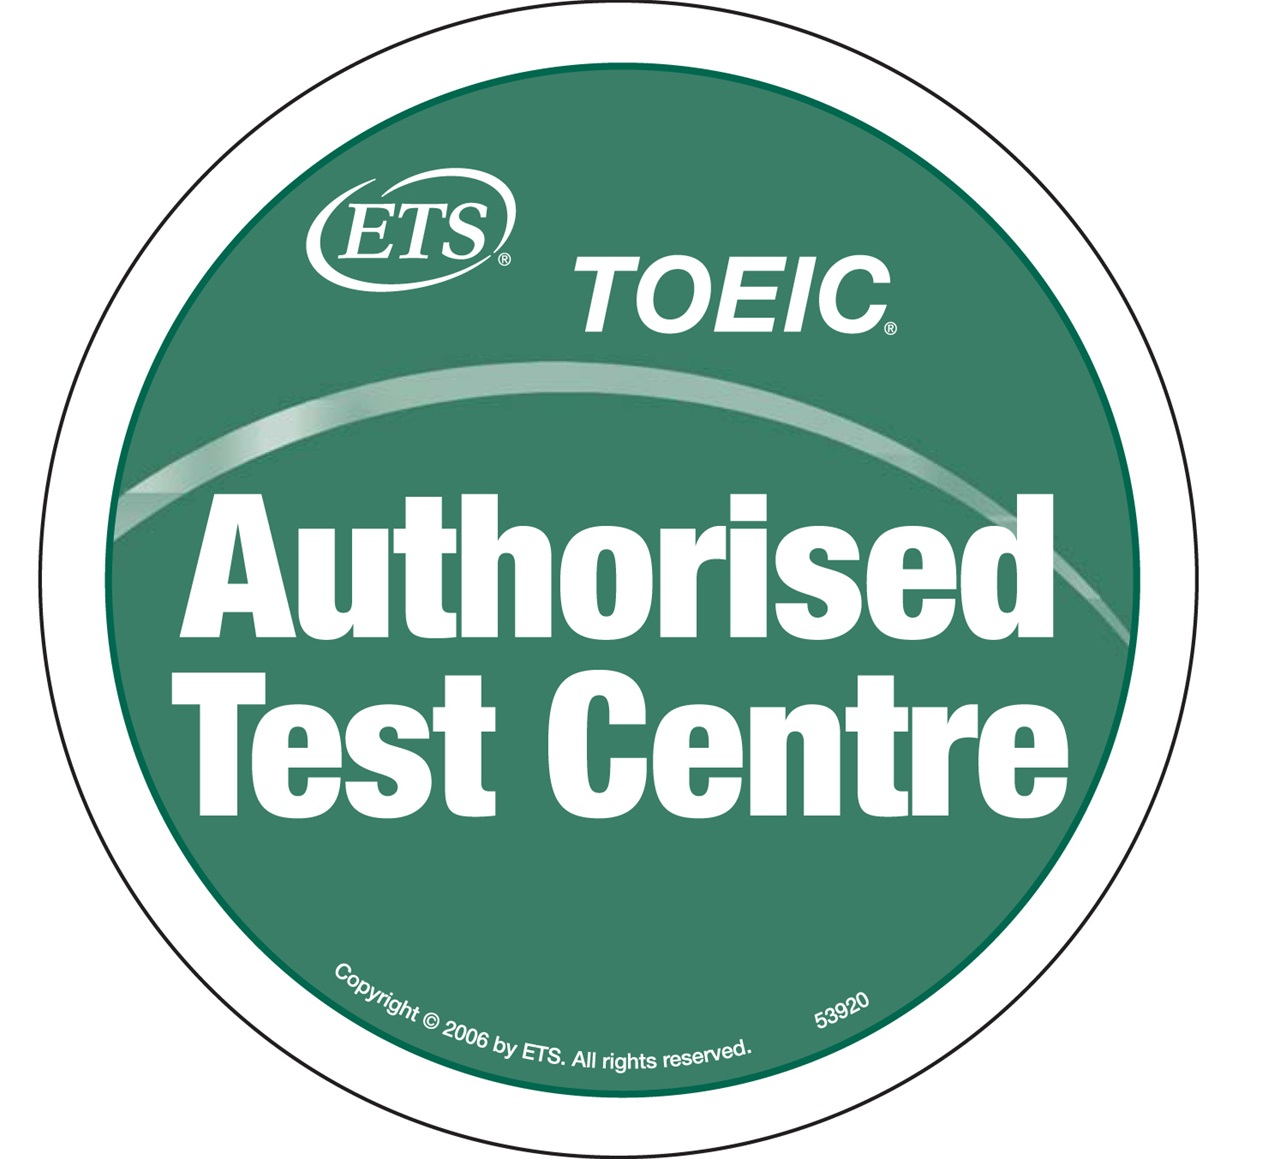 Take your TOEIC test